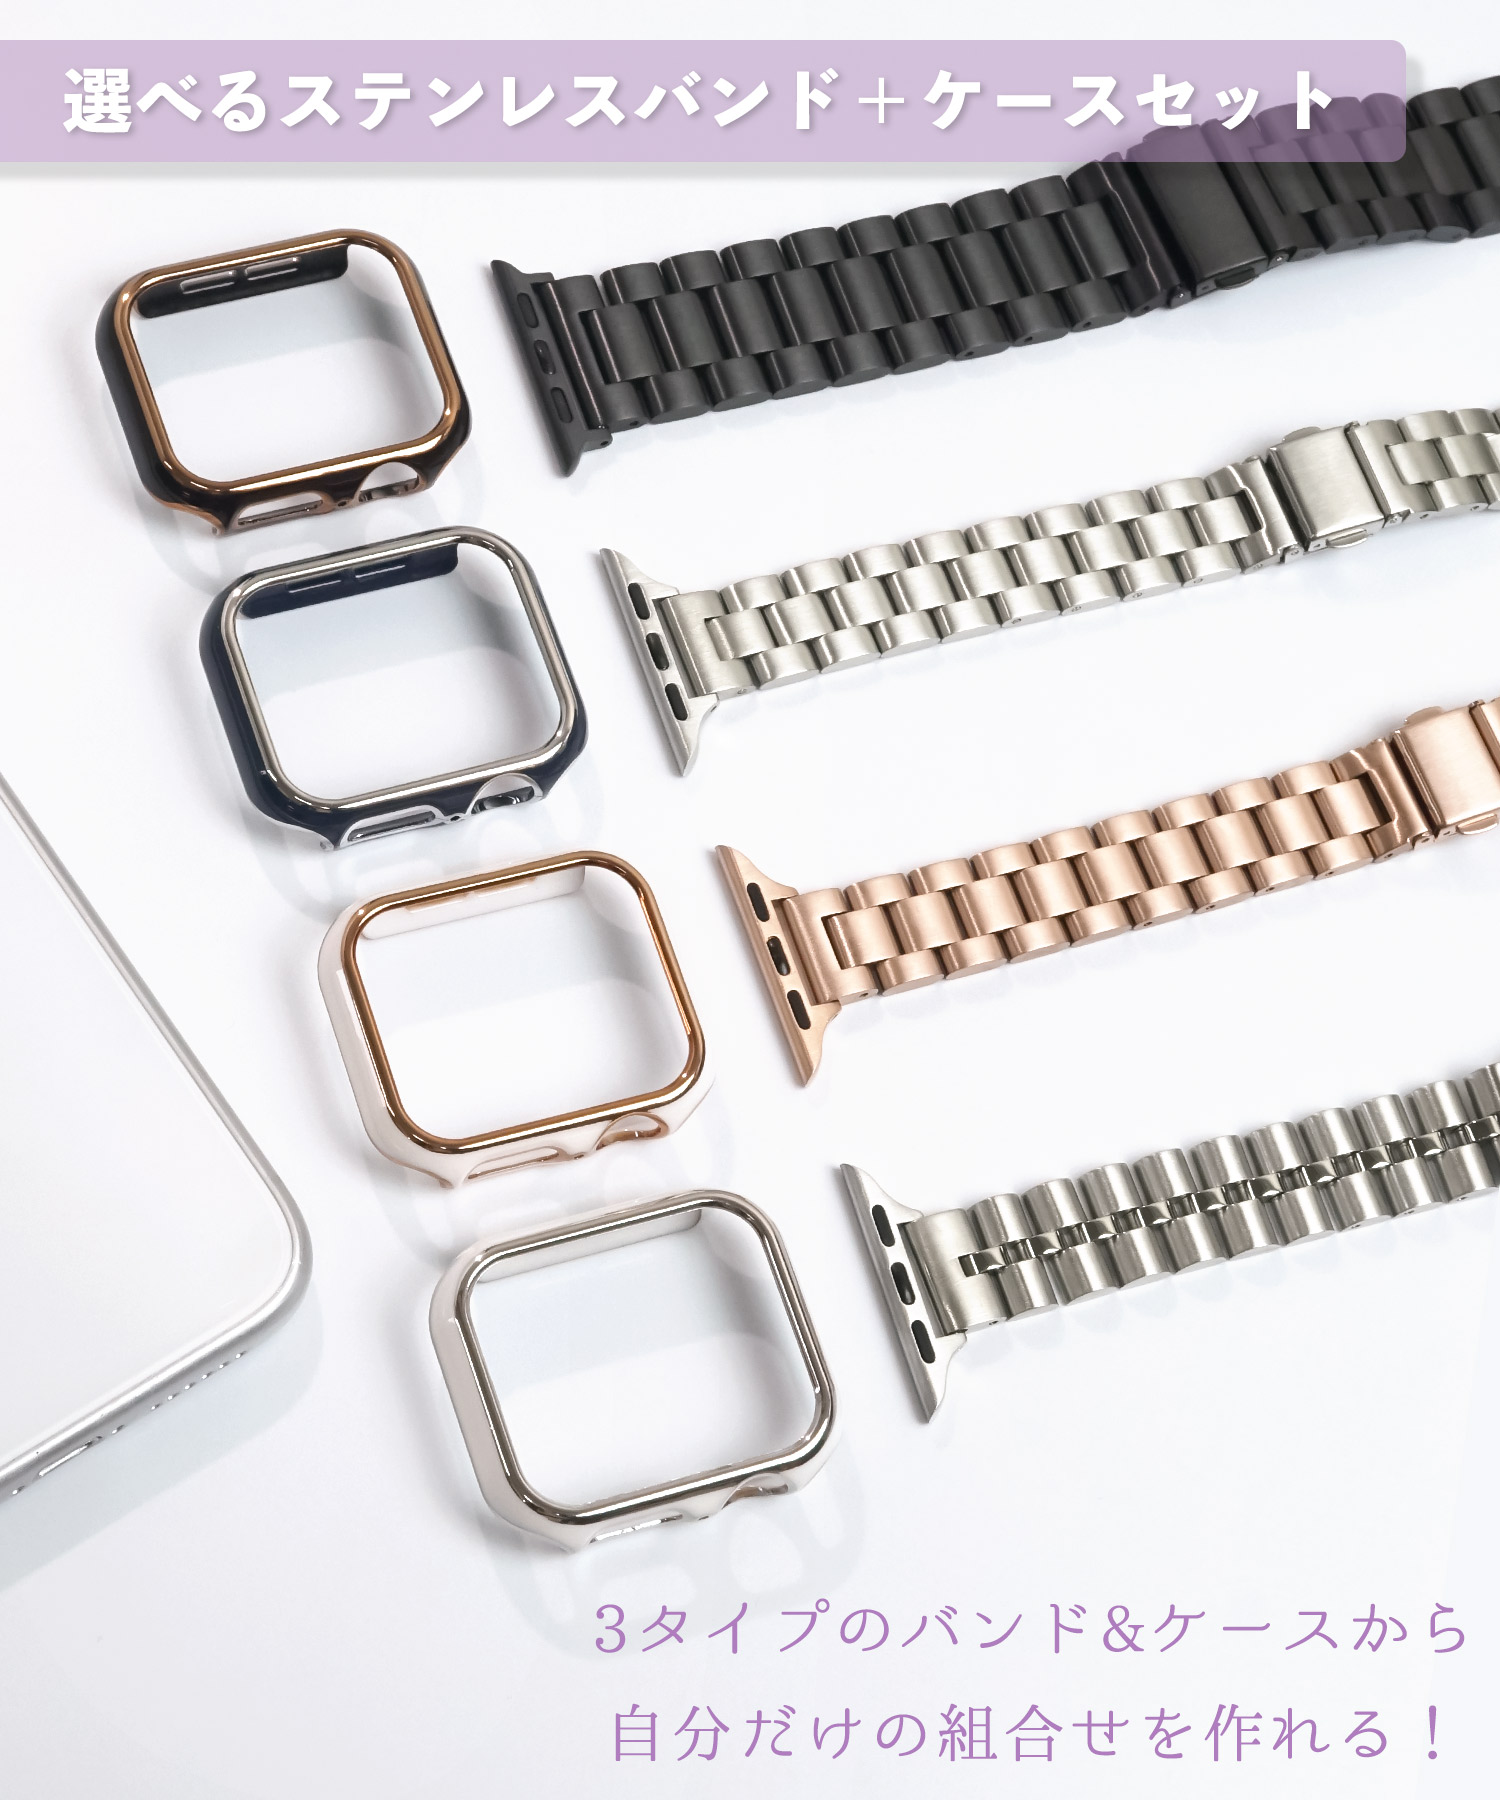  Apple watch band cover case set high class woman man stylish brand stainless steel belt 38mm 40mm 42mm 44mm 1 2 3 4 5 6 7 SE